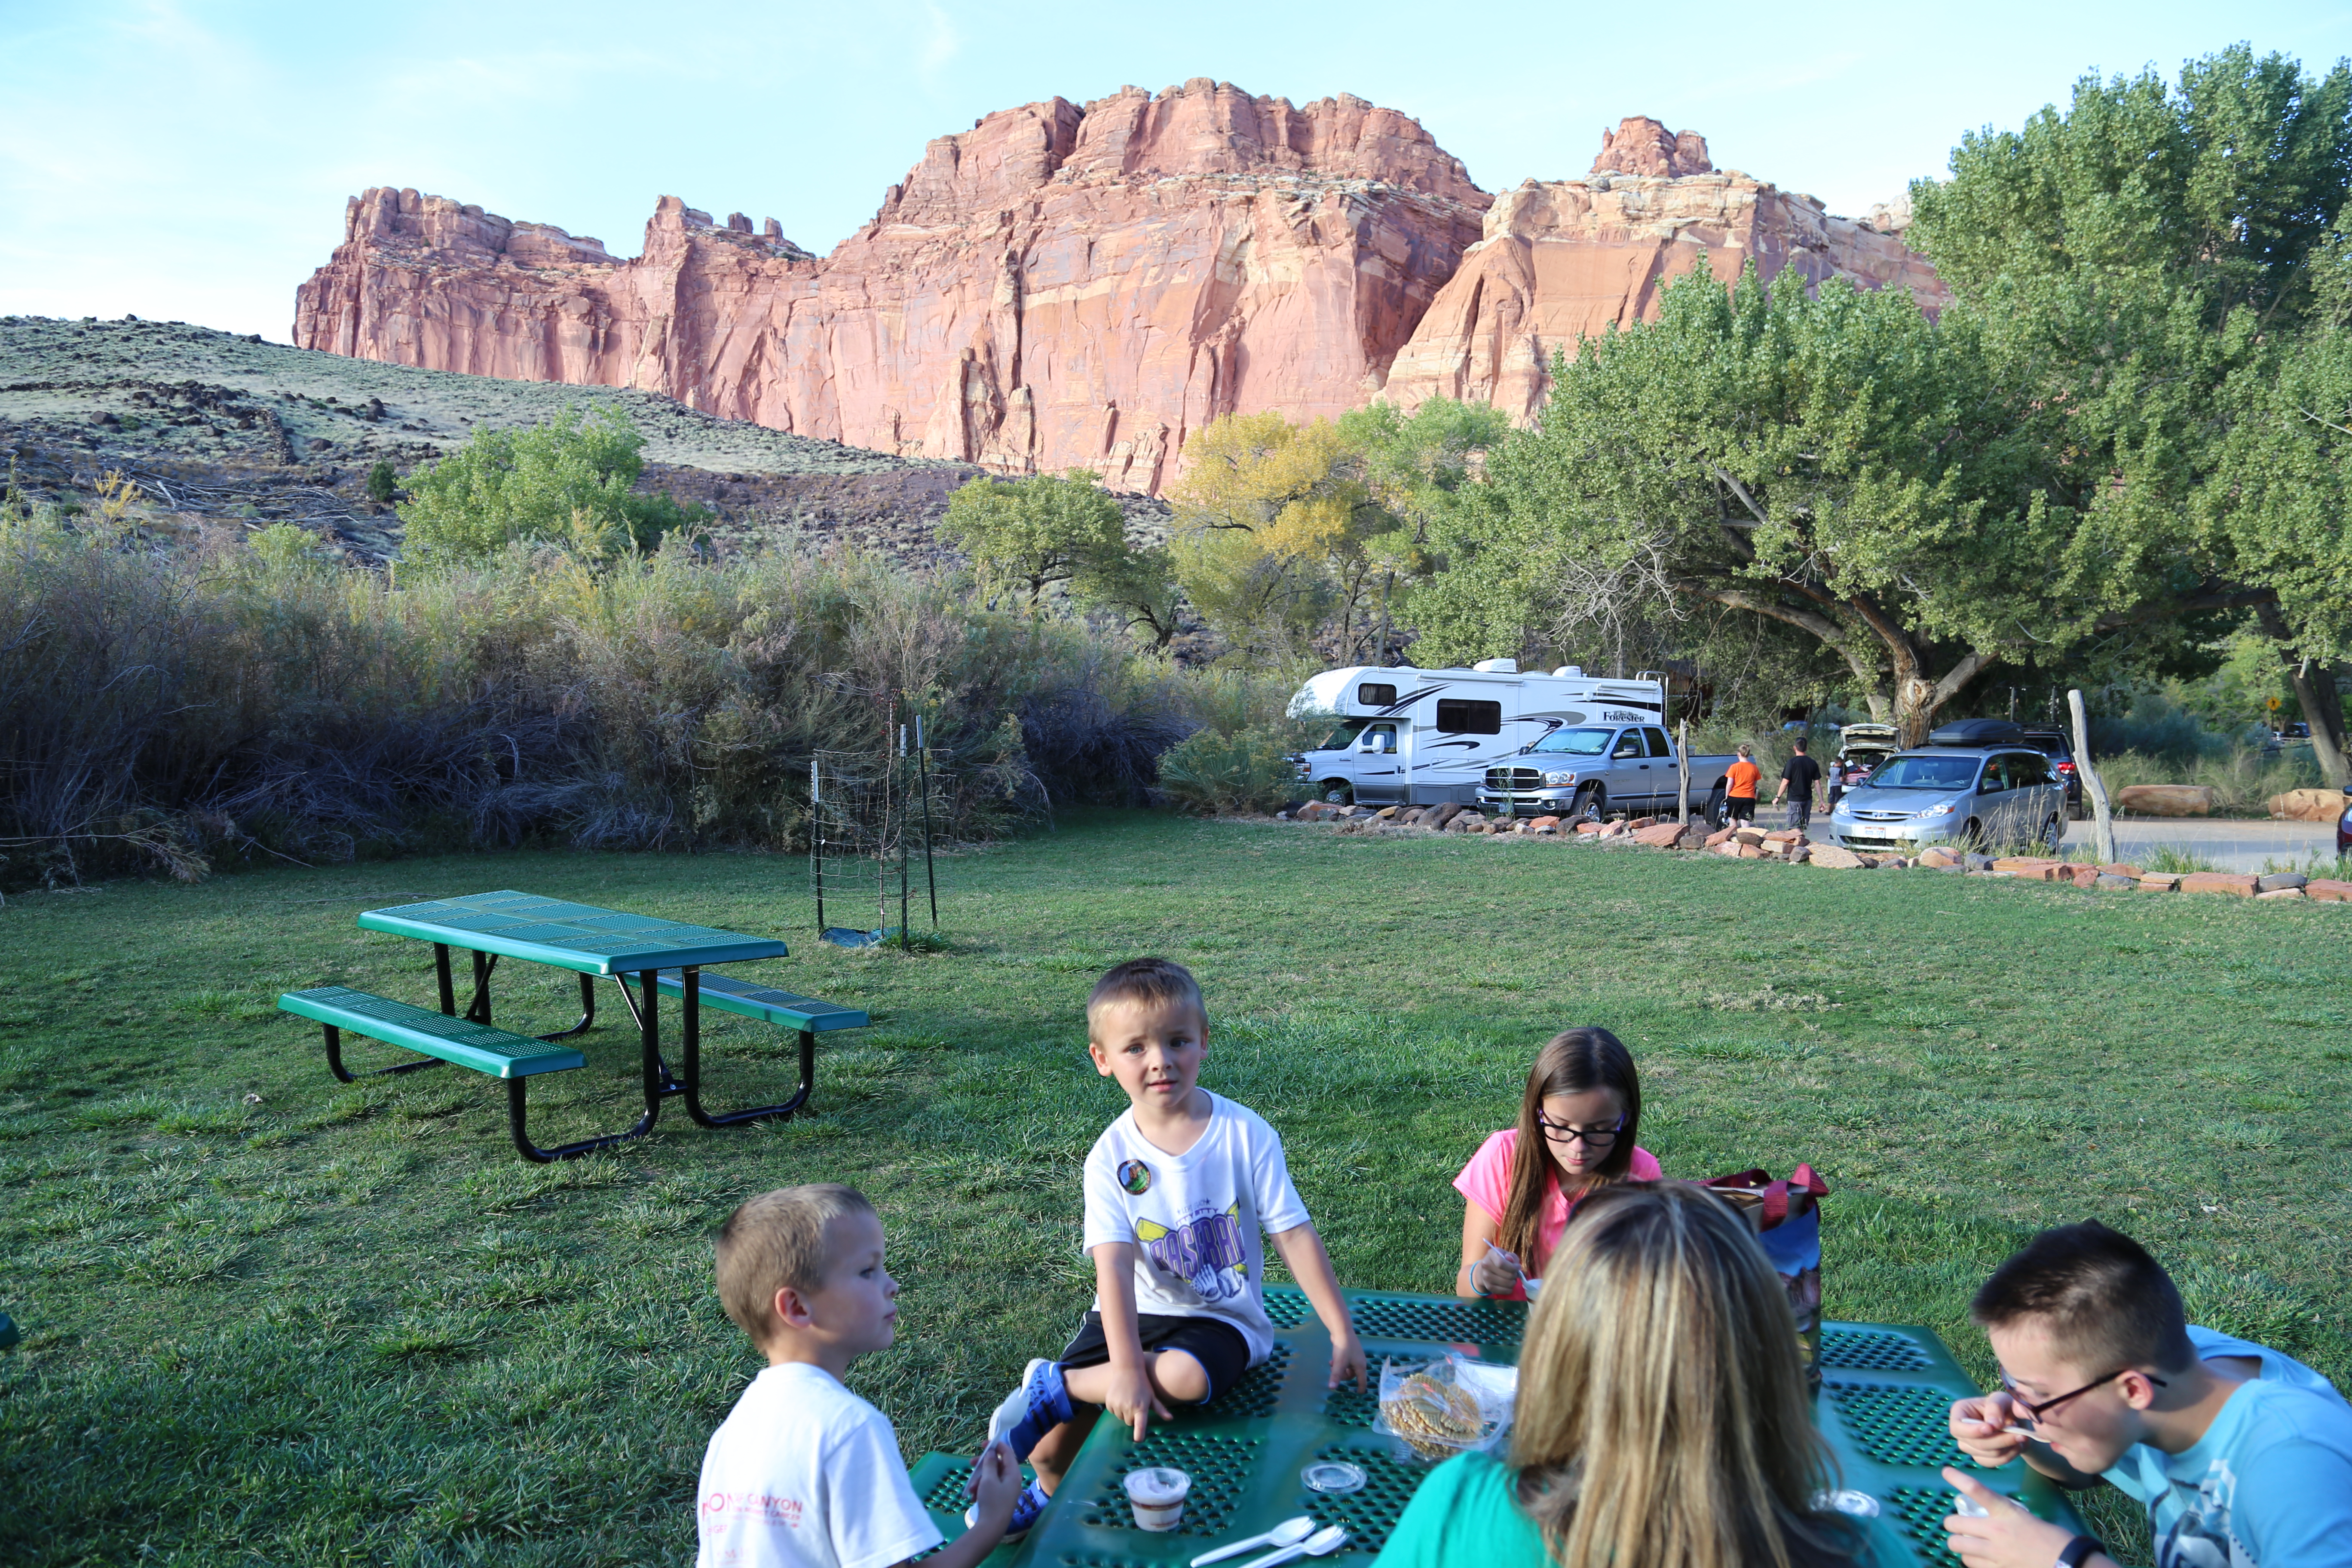 2015 Fall Break - Day 1 - Capitol Reef National Park (Fremont Petroglyphs, Fruita Historic Schoolhouse, Gifford House Pies, Indian in the Cupboard)